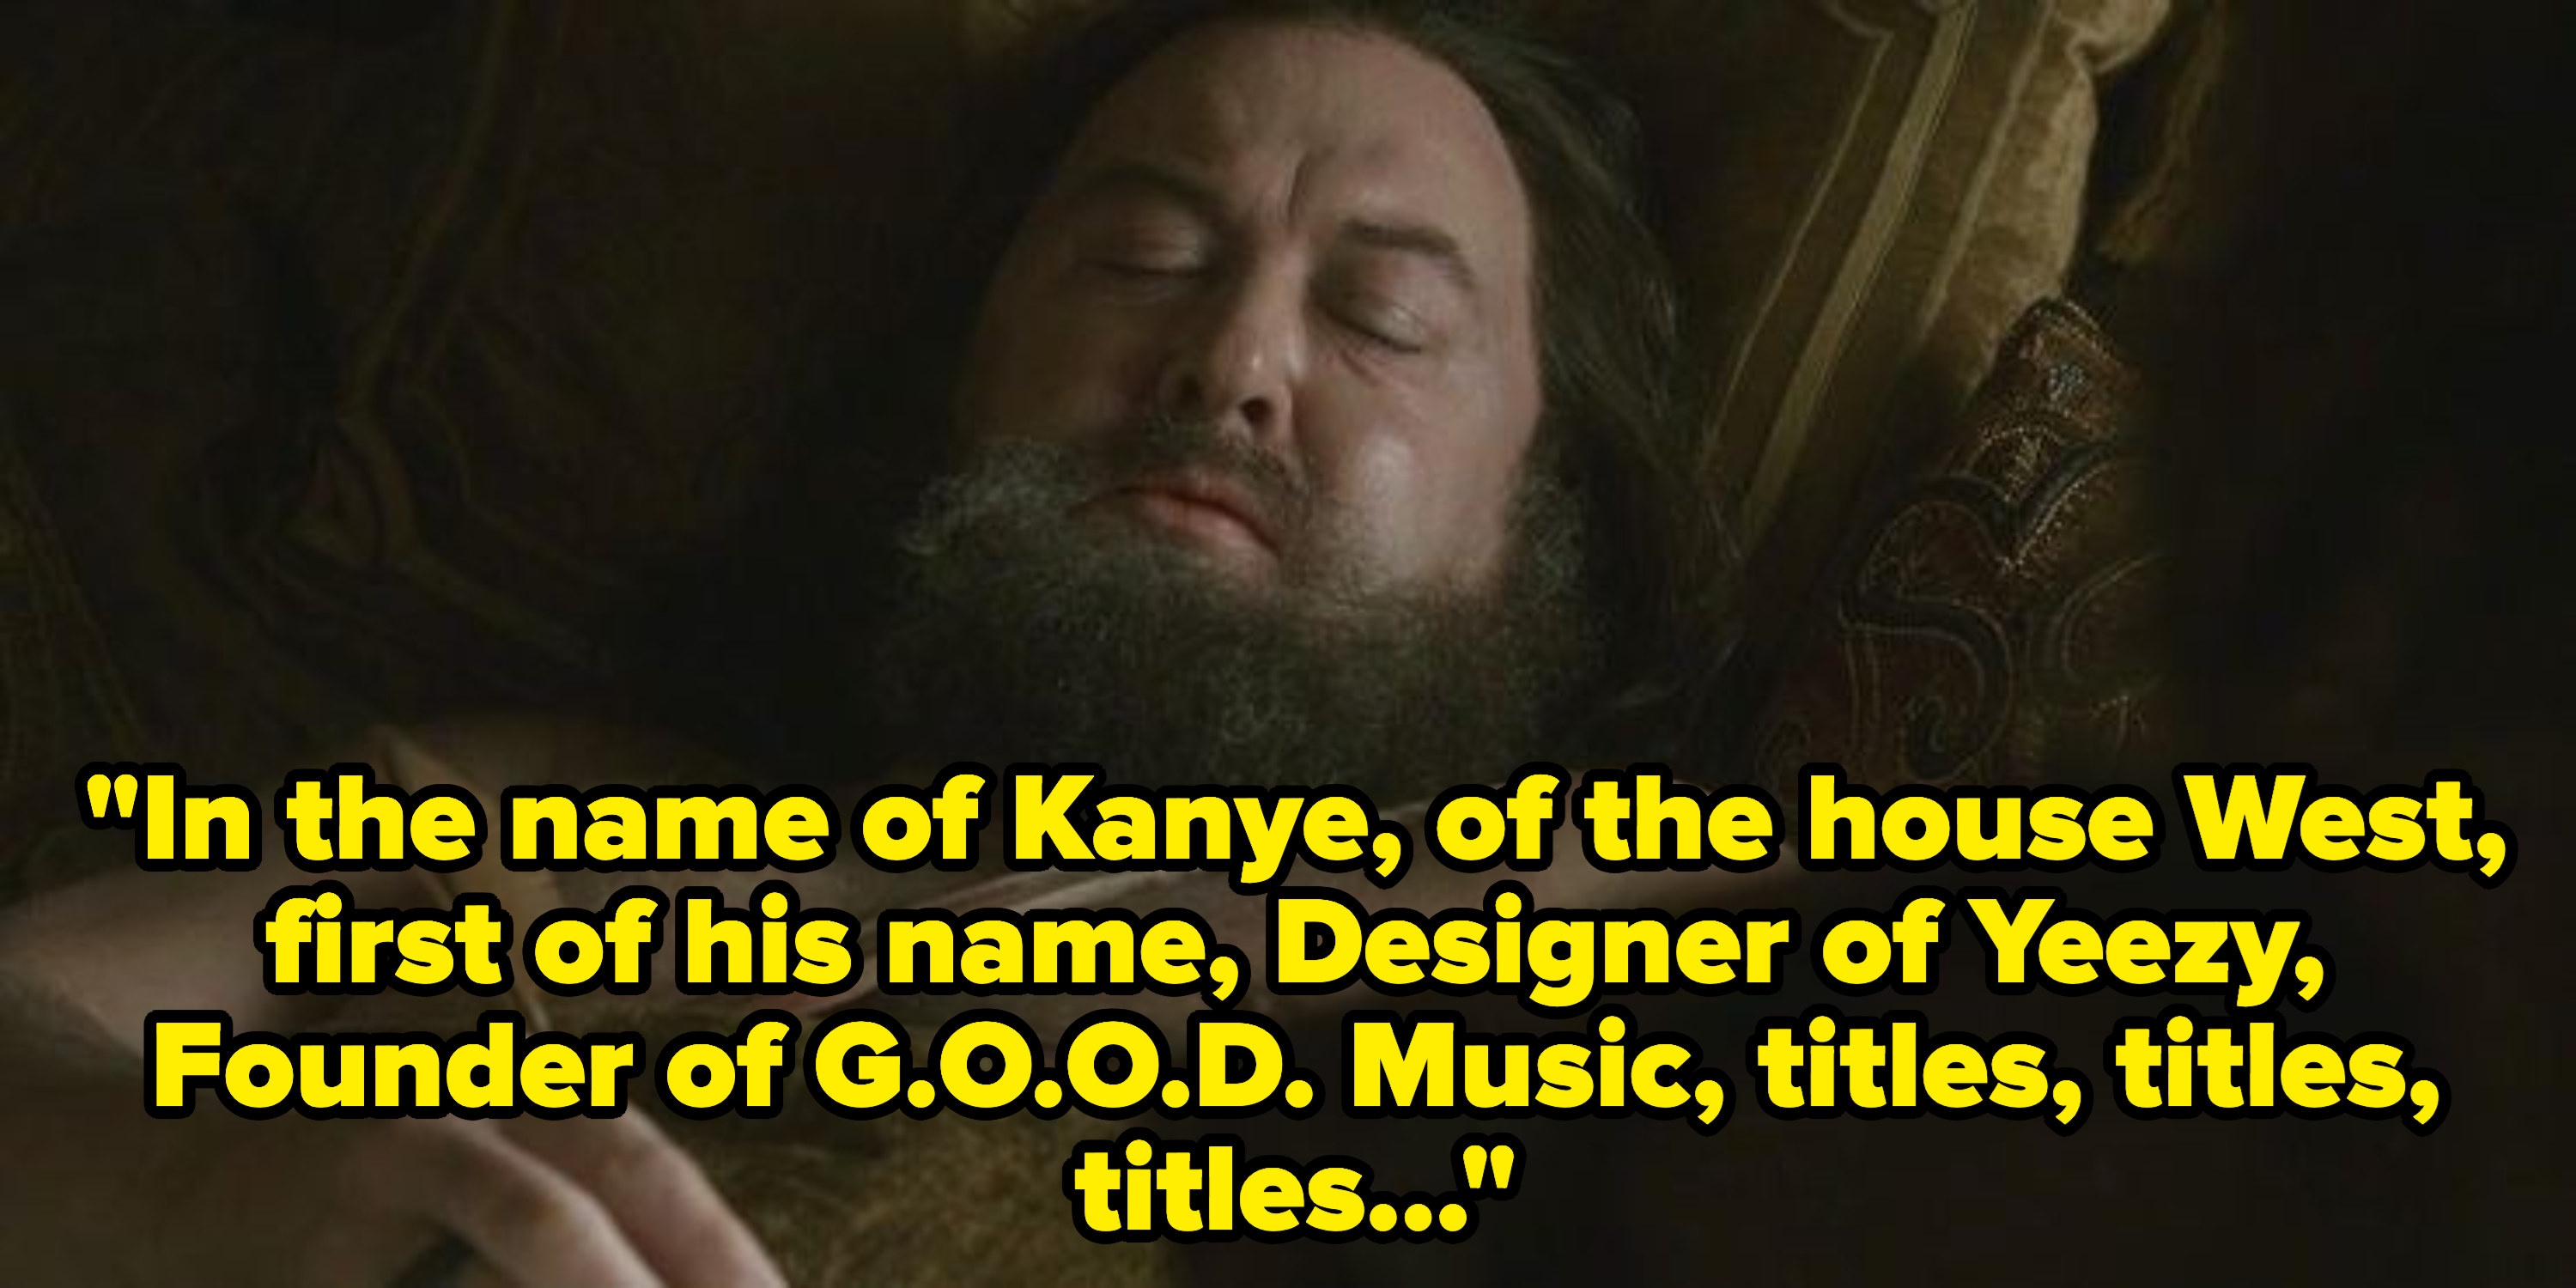 Robert Baratheon signing his will on his death bed with the caption &quot;In the name of Kanye, of the house West, first of his name, Designer of Yeezy, Founder of G.O.O.D. Music, titles, titles, titles...&quot;